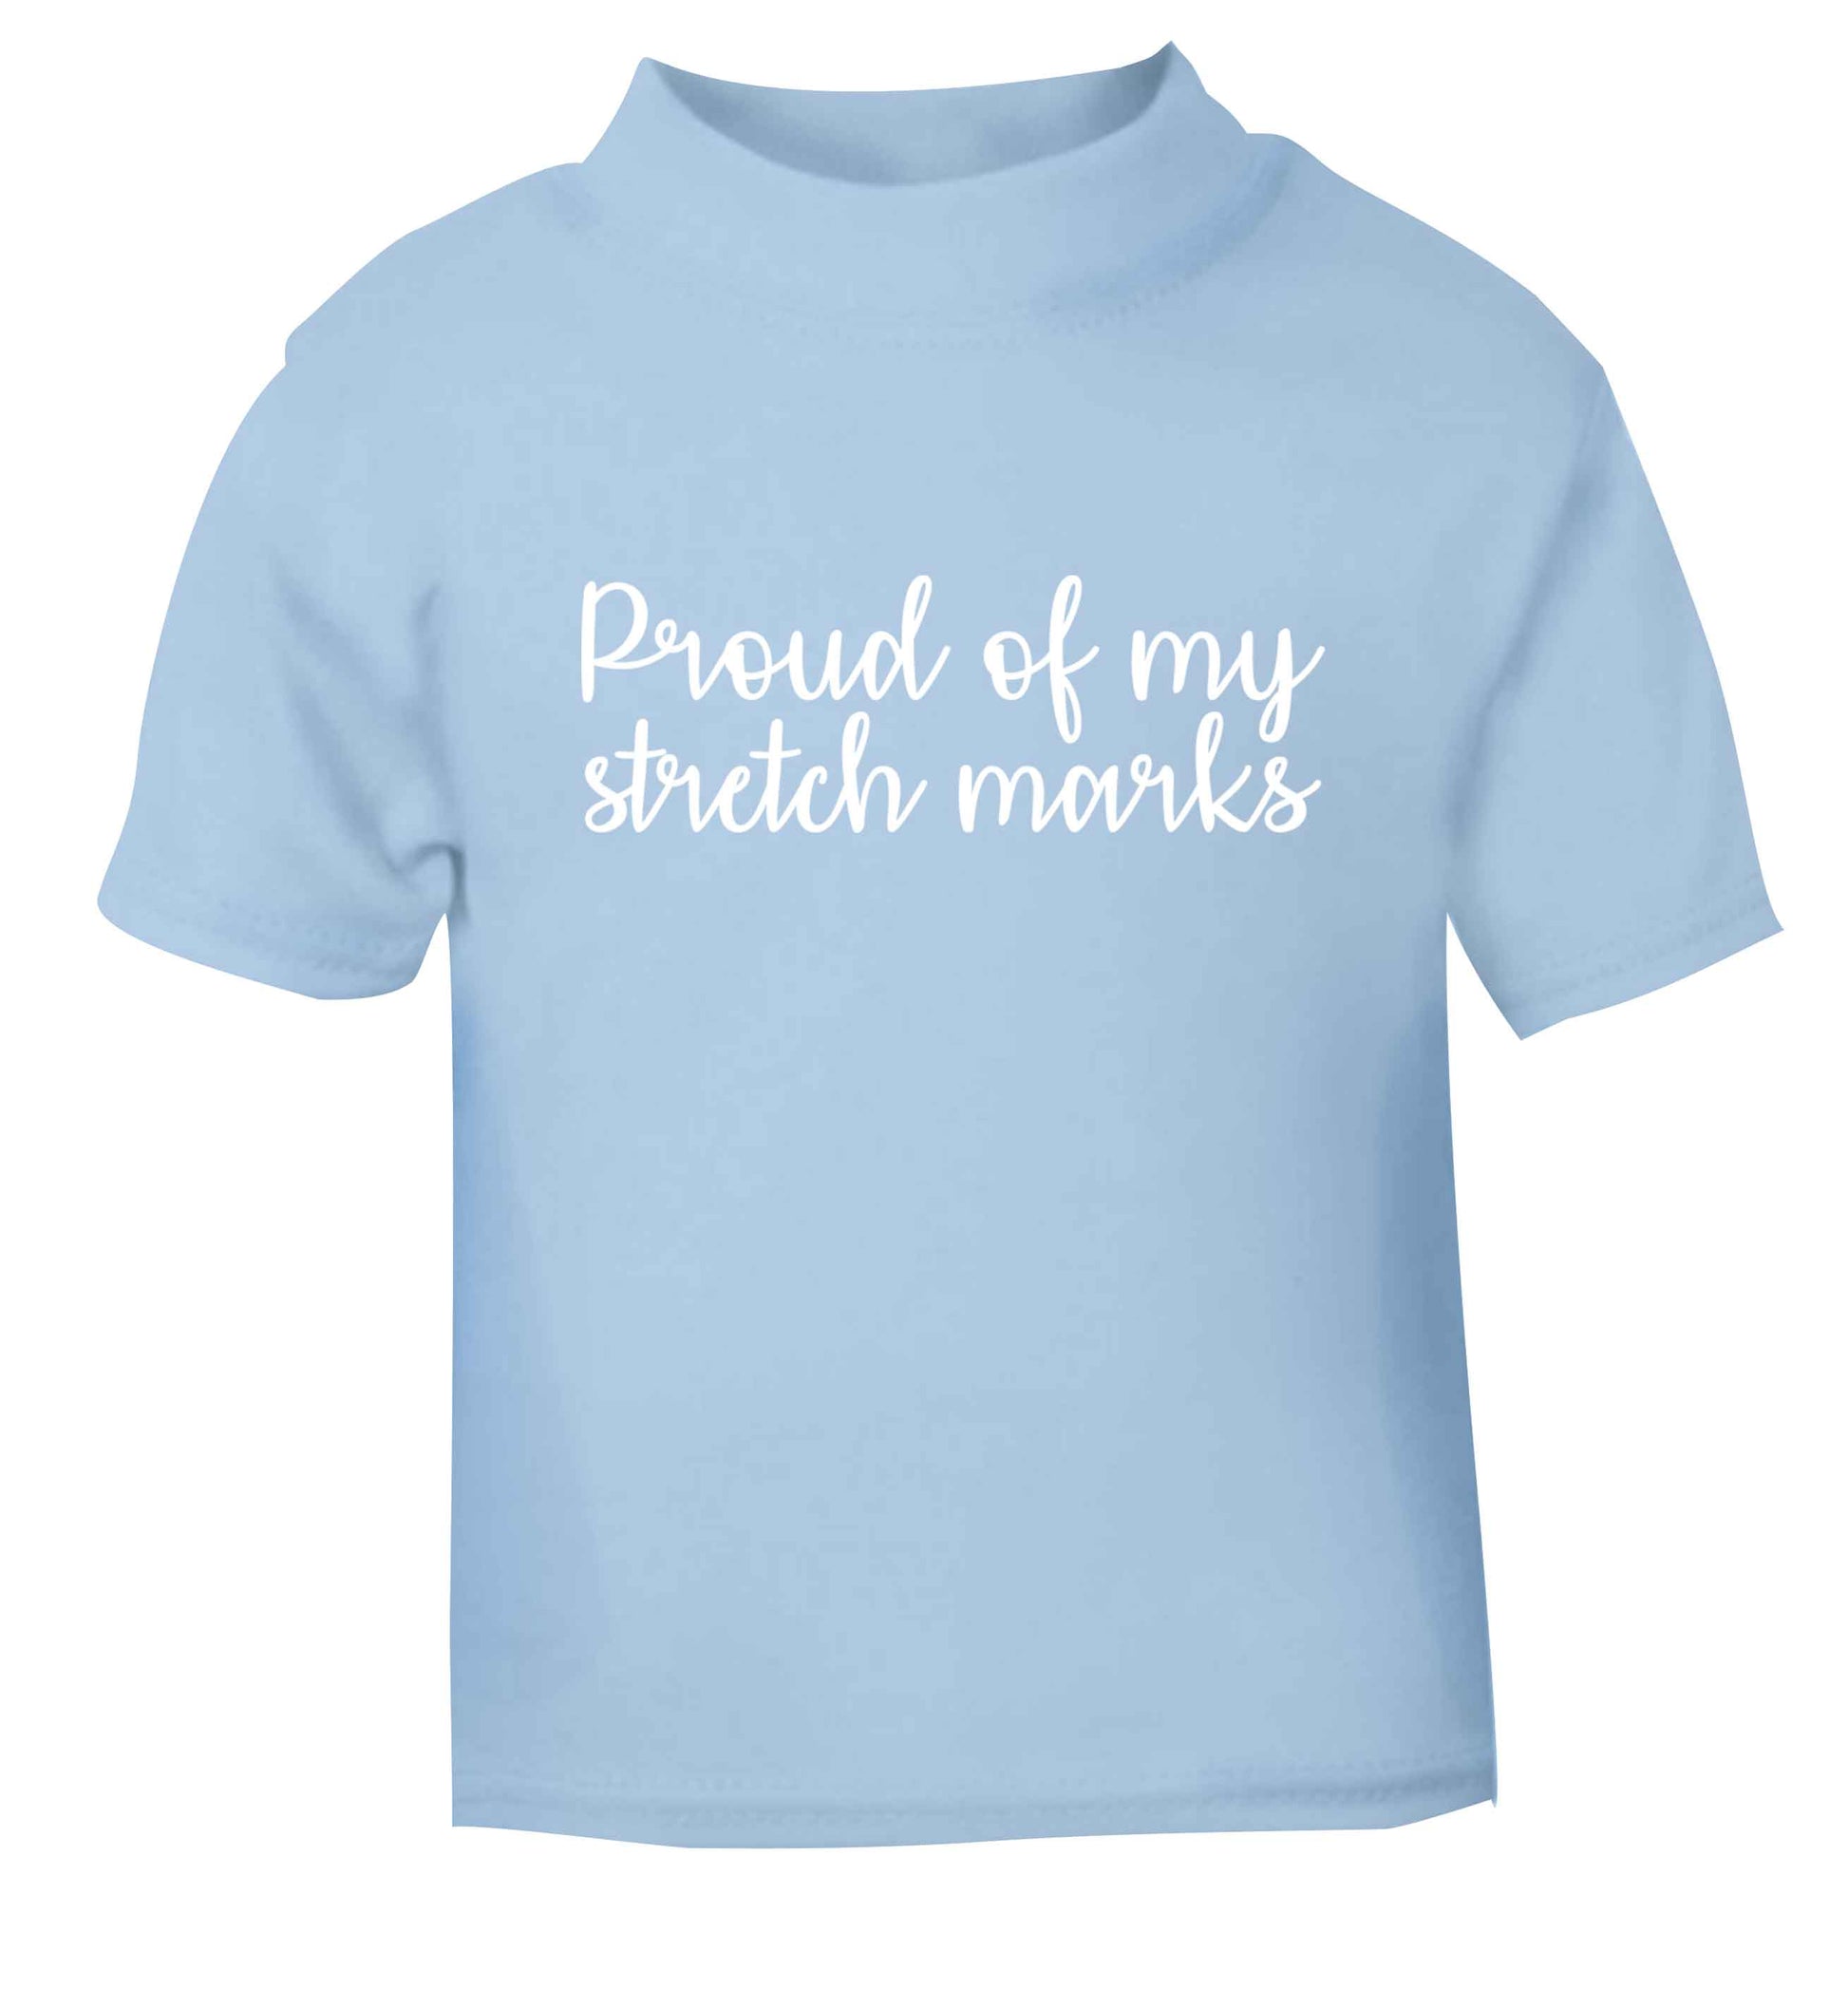 Proud of my stretch marks light blue baby toddler Tshirt 2 Years